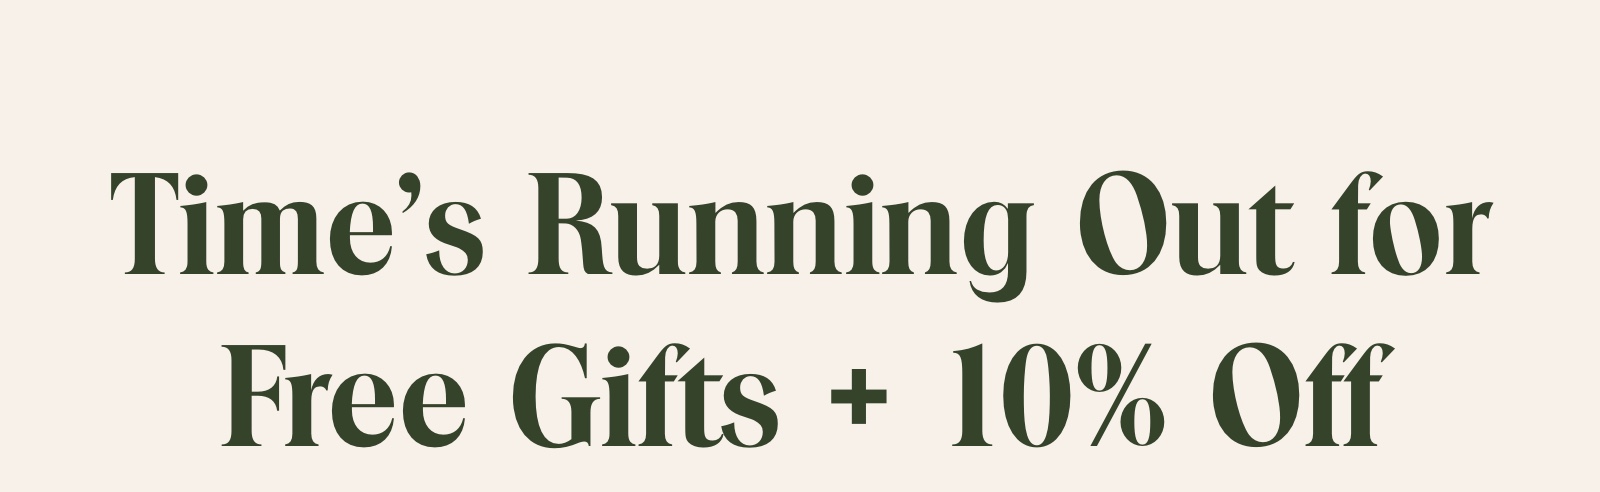 Time's Running Out for Free Gifts + 10% Off